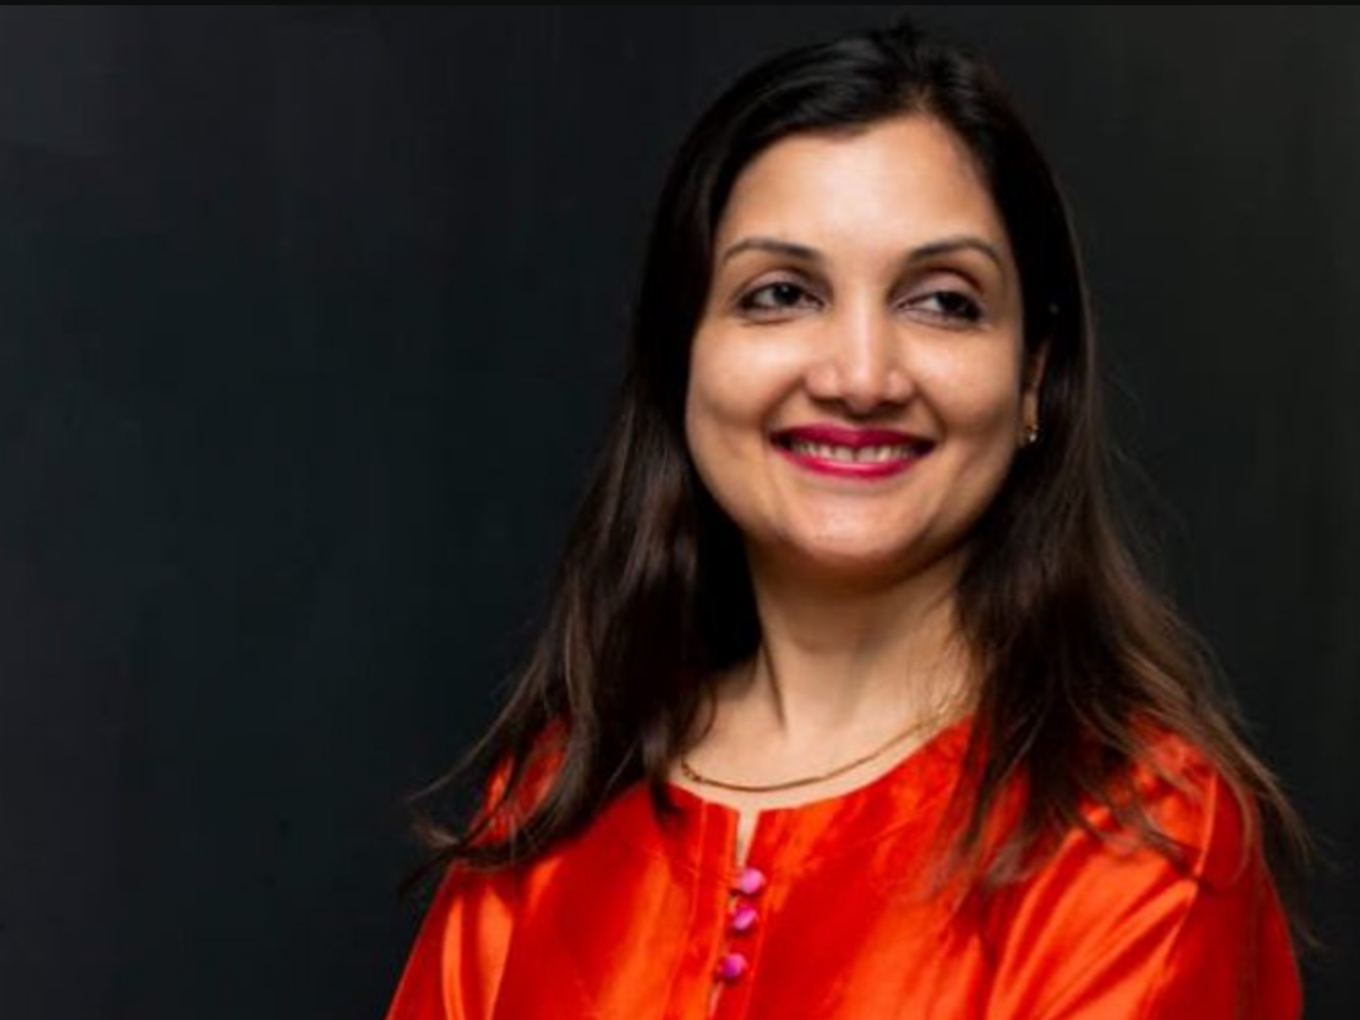 Now, BharatPe’s Head of Control, Madhuri Jain has written to the company board alleging that she never actually tendered her resignation, which she claims was accepted by the Board, according to a recent report by ET.